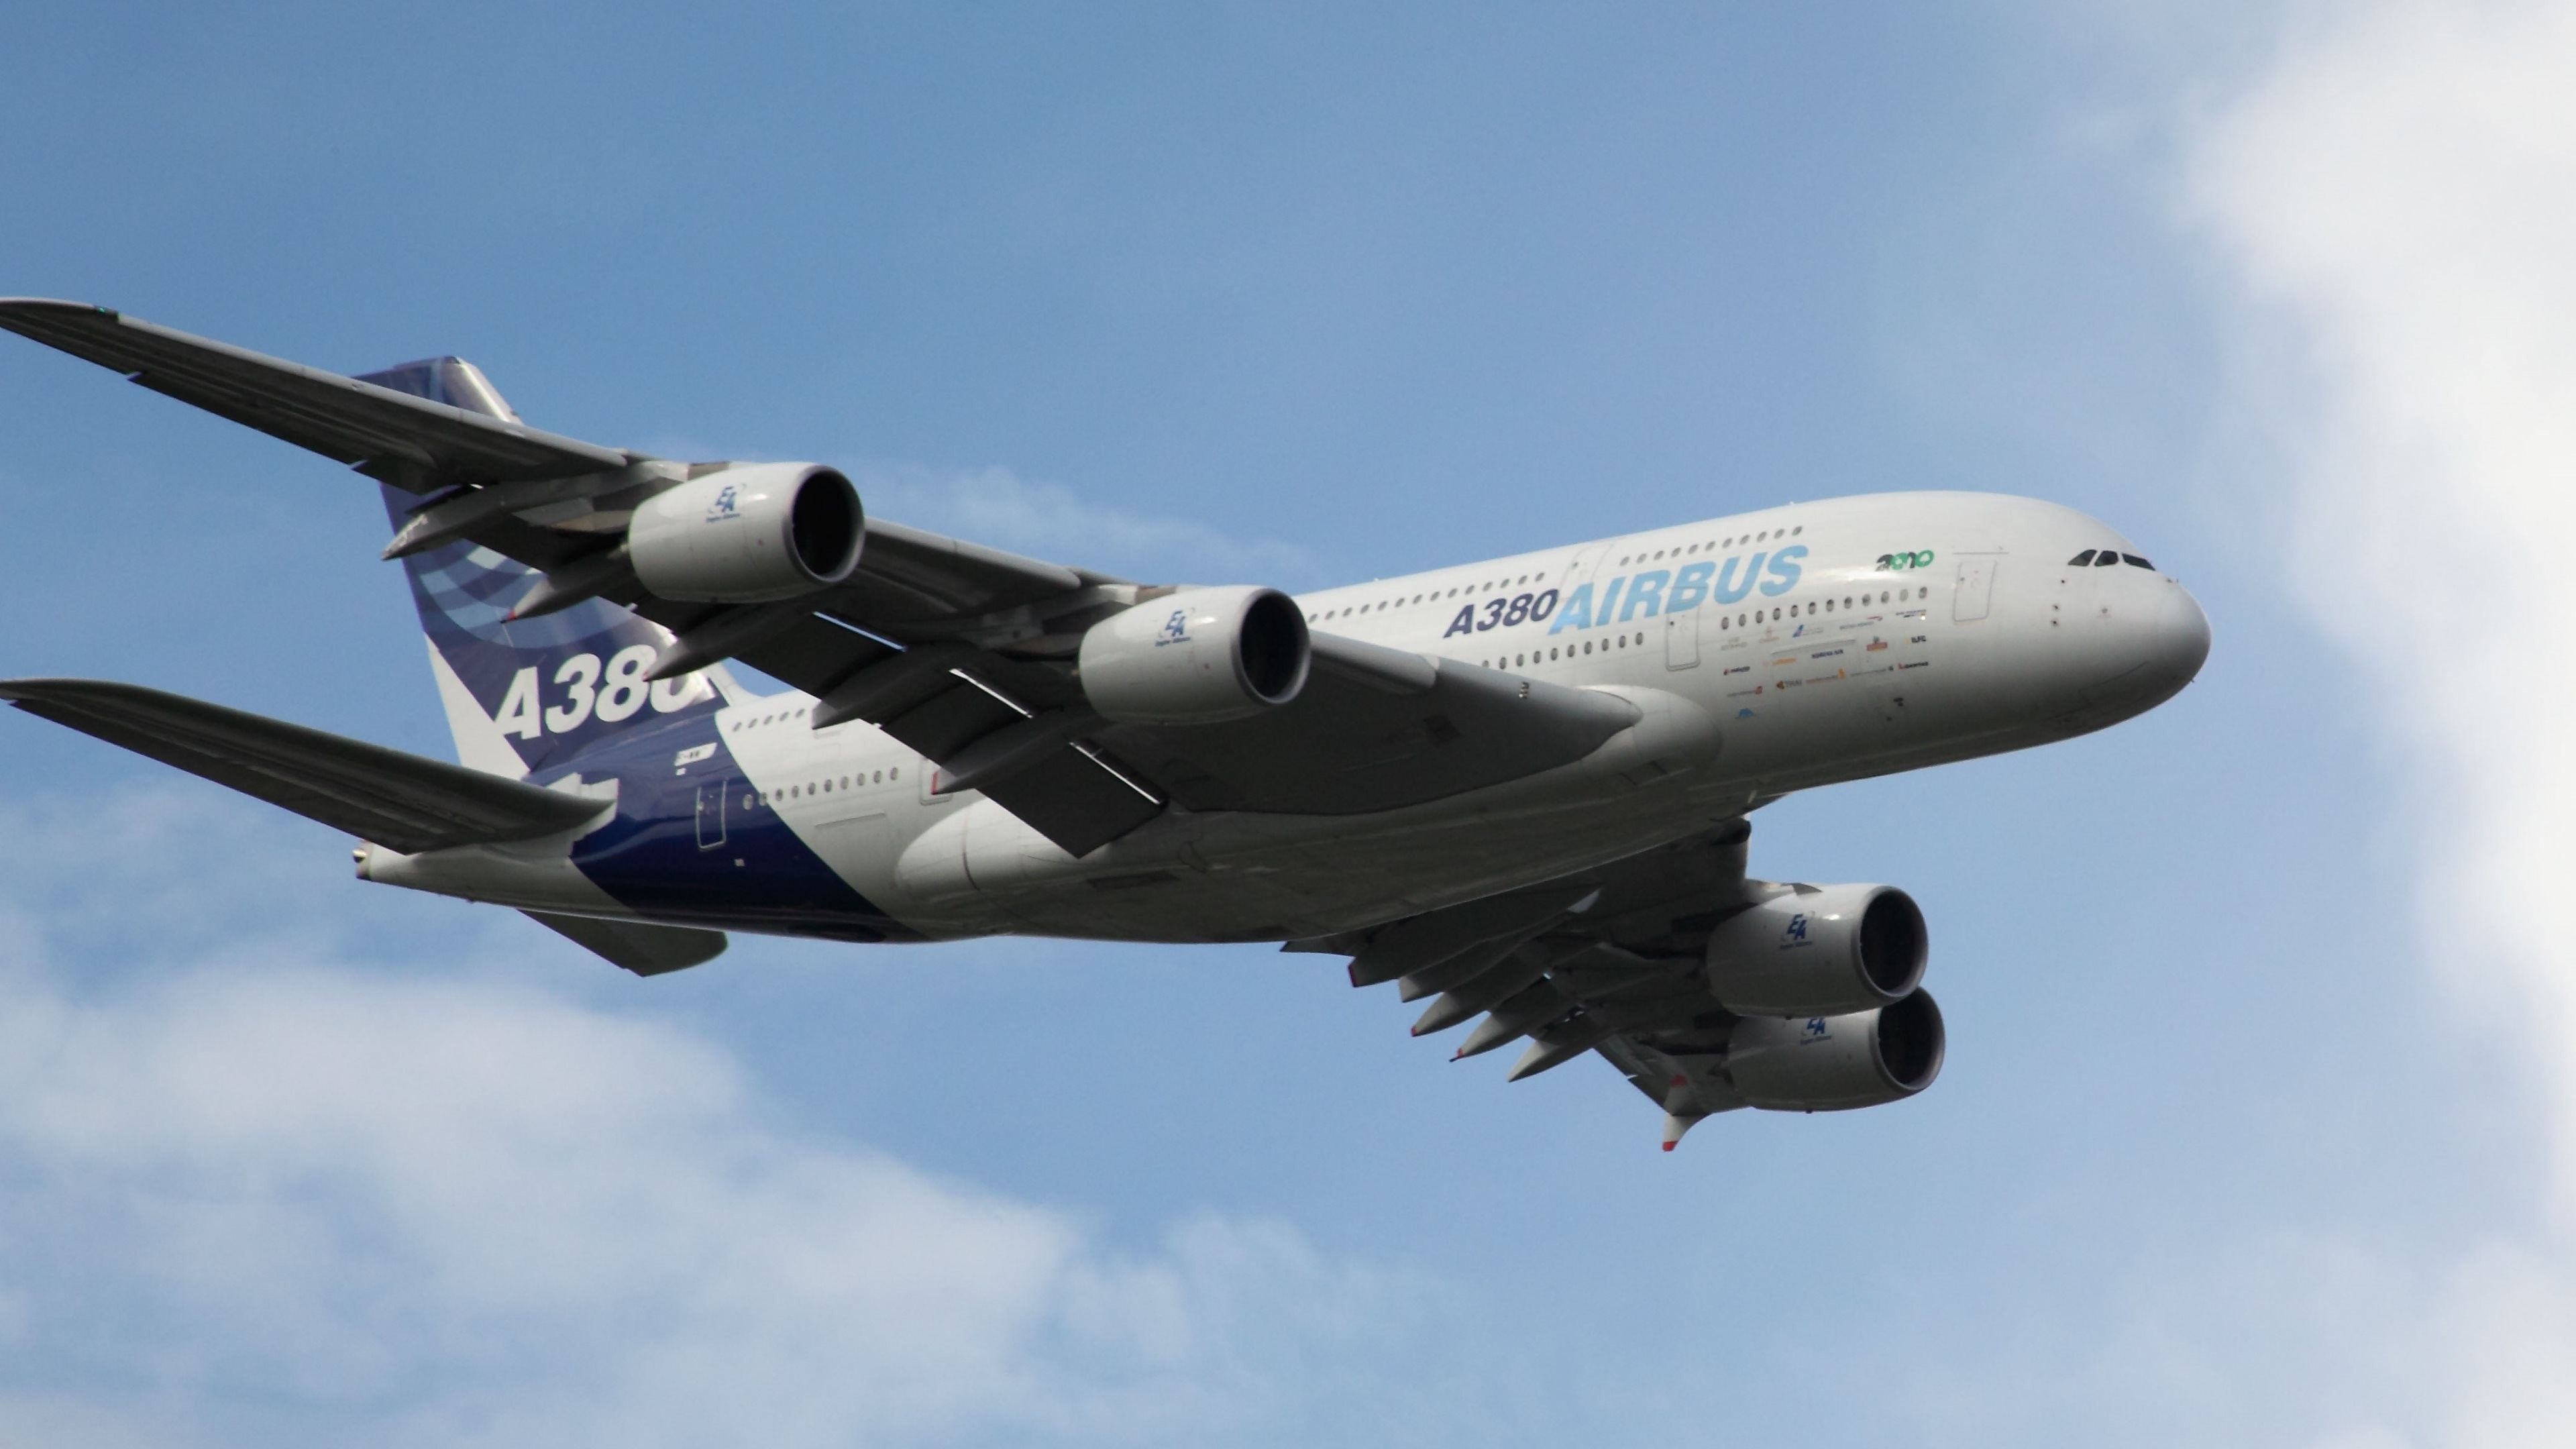 Airbus A380, High-resolution wallpapers, Airbus A380-800, Stunning backgrounds, 3840x2160 4K Desktop